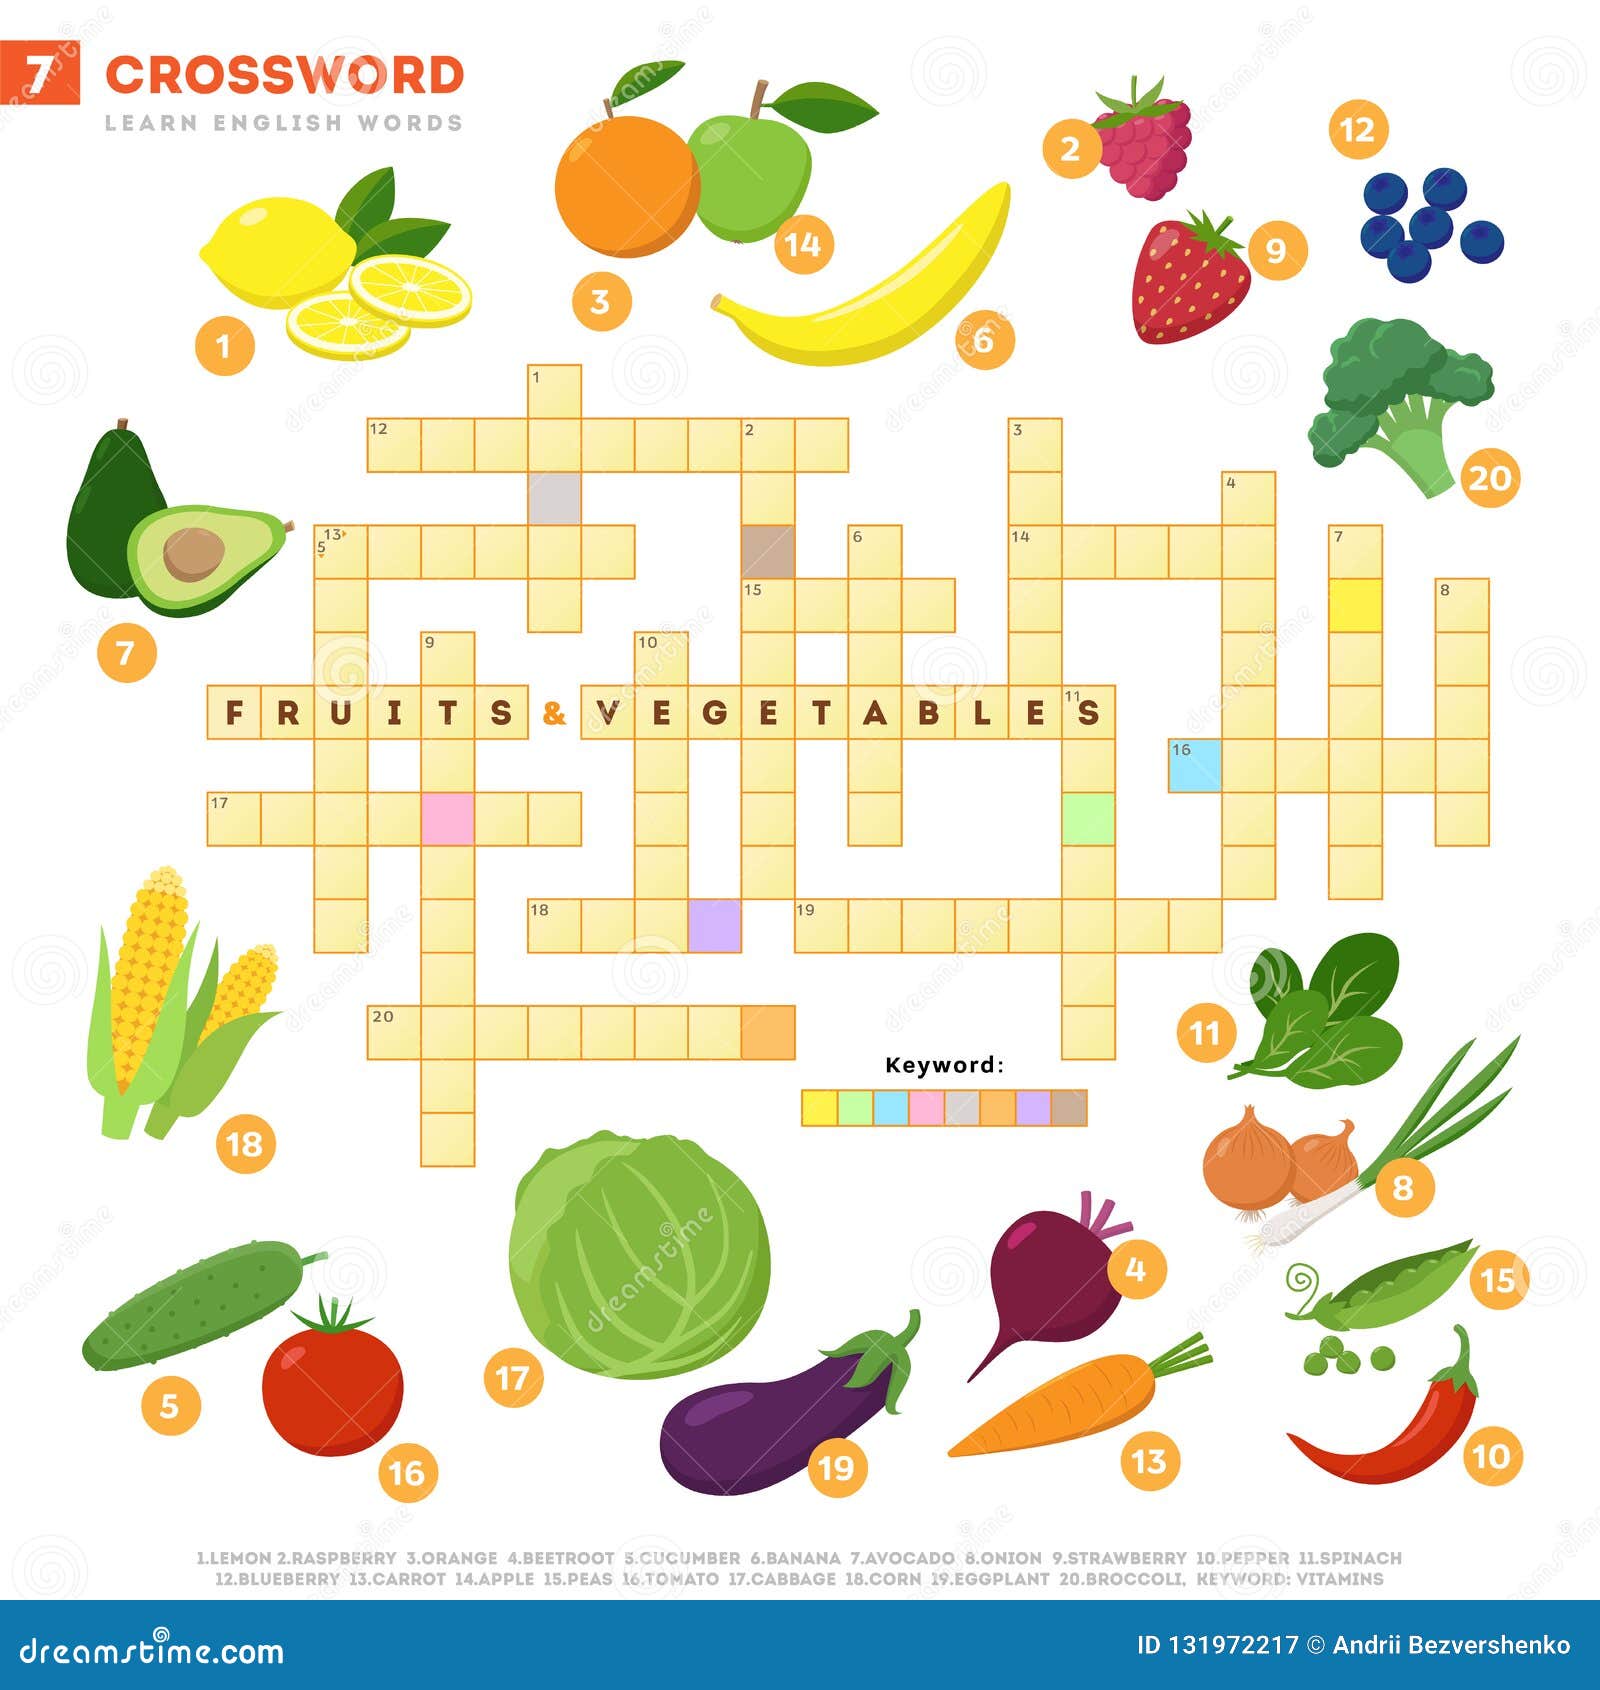 Crossword with Huge Set of Illustrations and Keyword in Vector Flat Design  Isolated on White Background. Crossword 7 - Stock Vector - Illustration of  food, design: 131972217